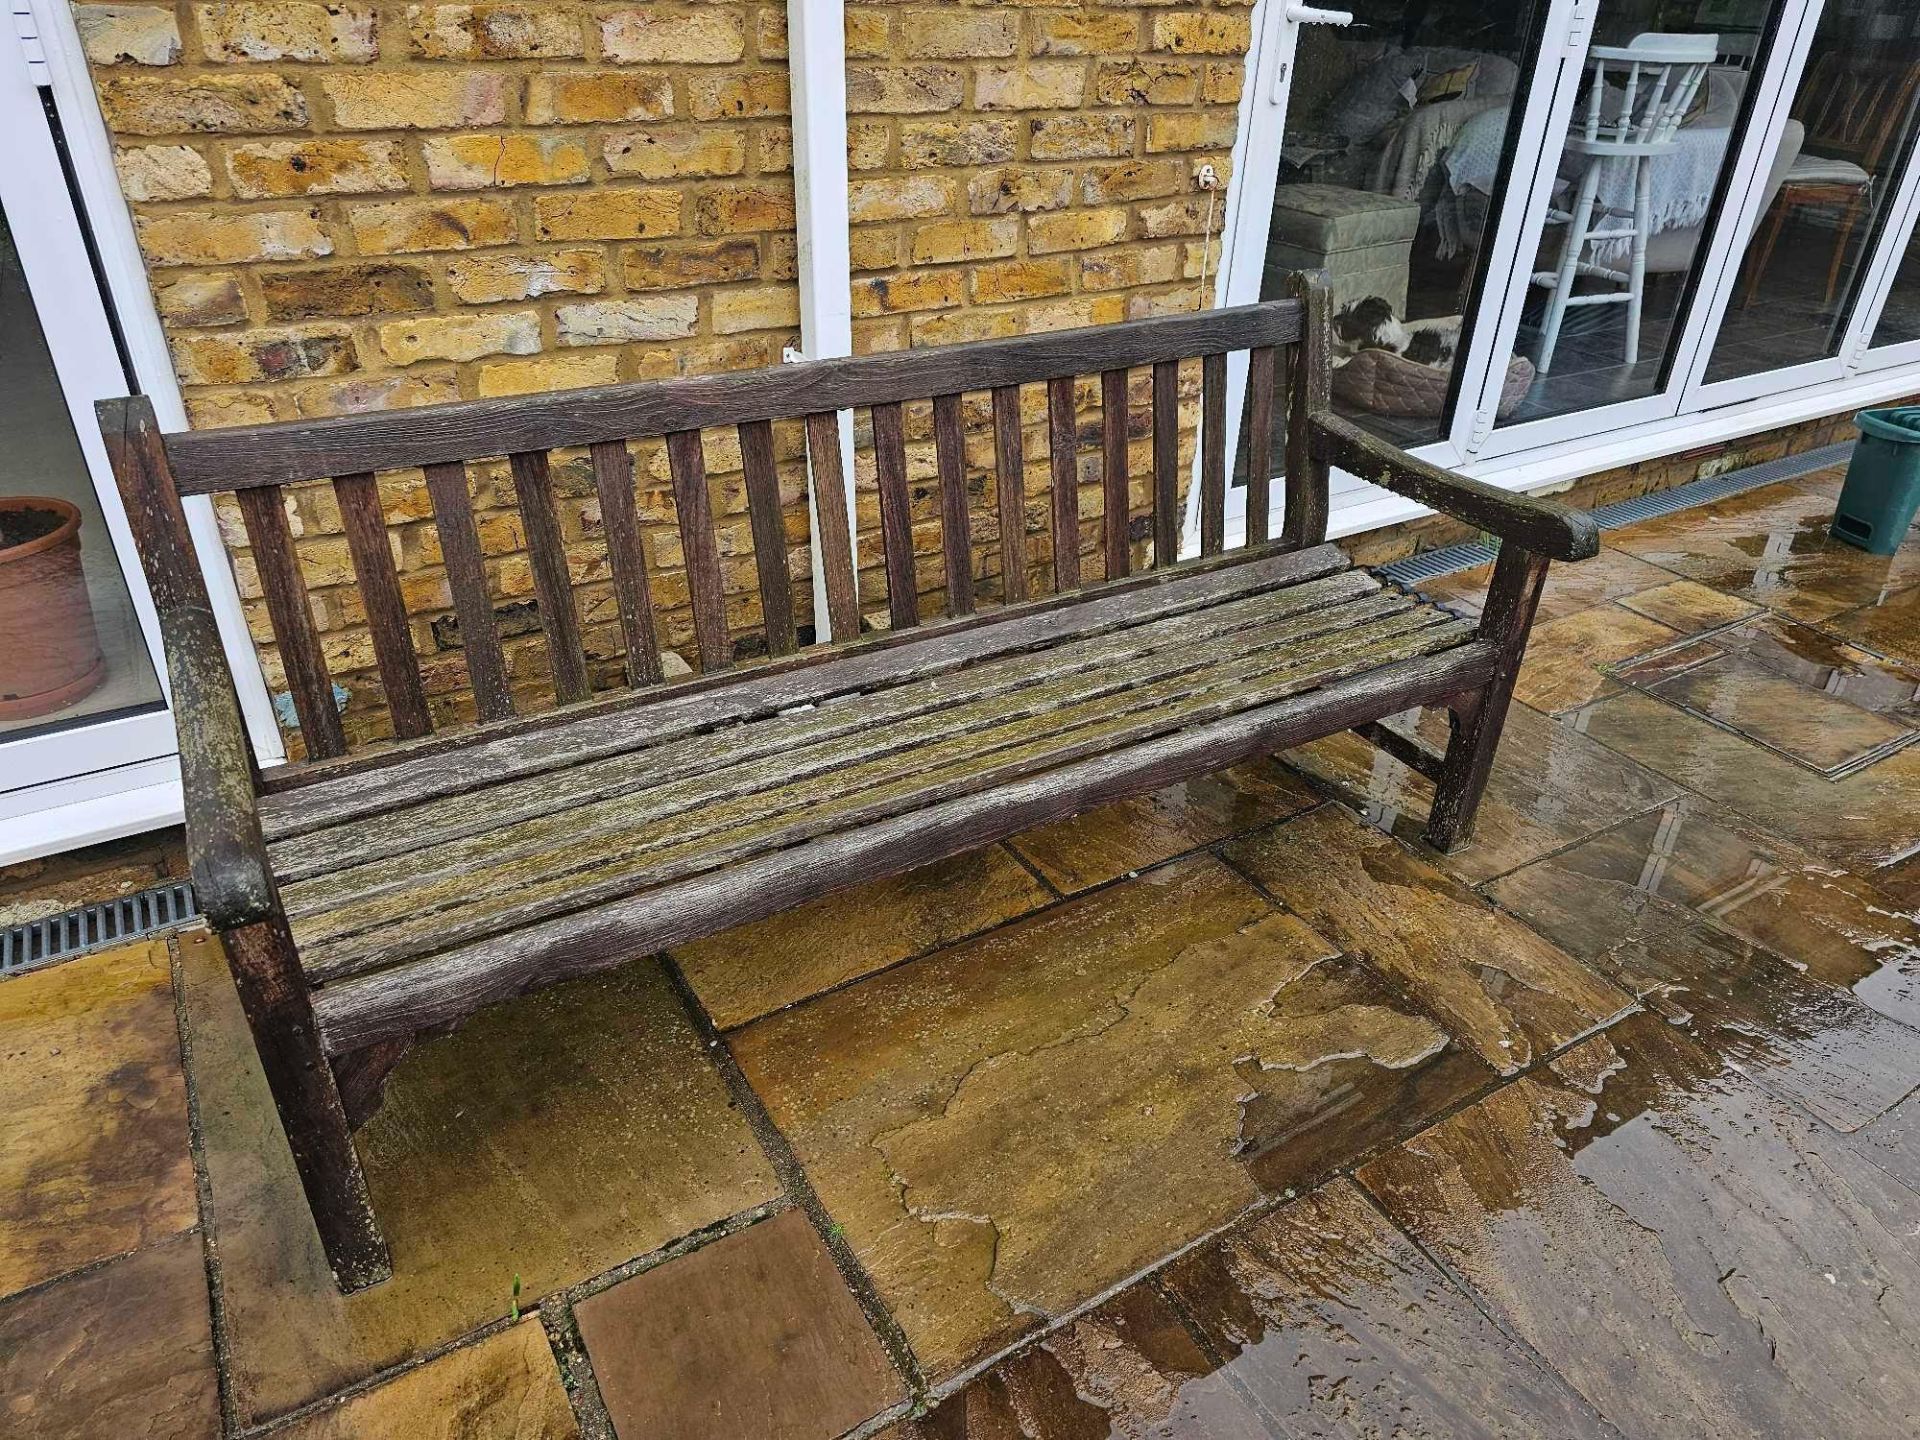 Heavy Garden Teak Park Bench Simple In Design With Straight Traditional Lines - Image 2 of 3